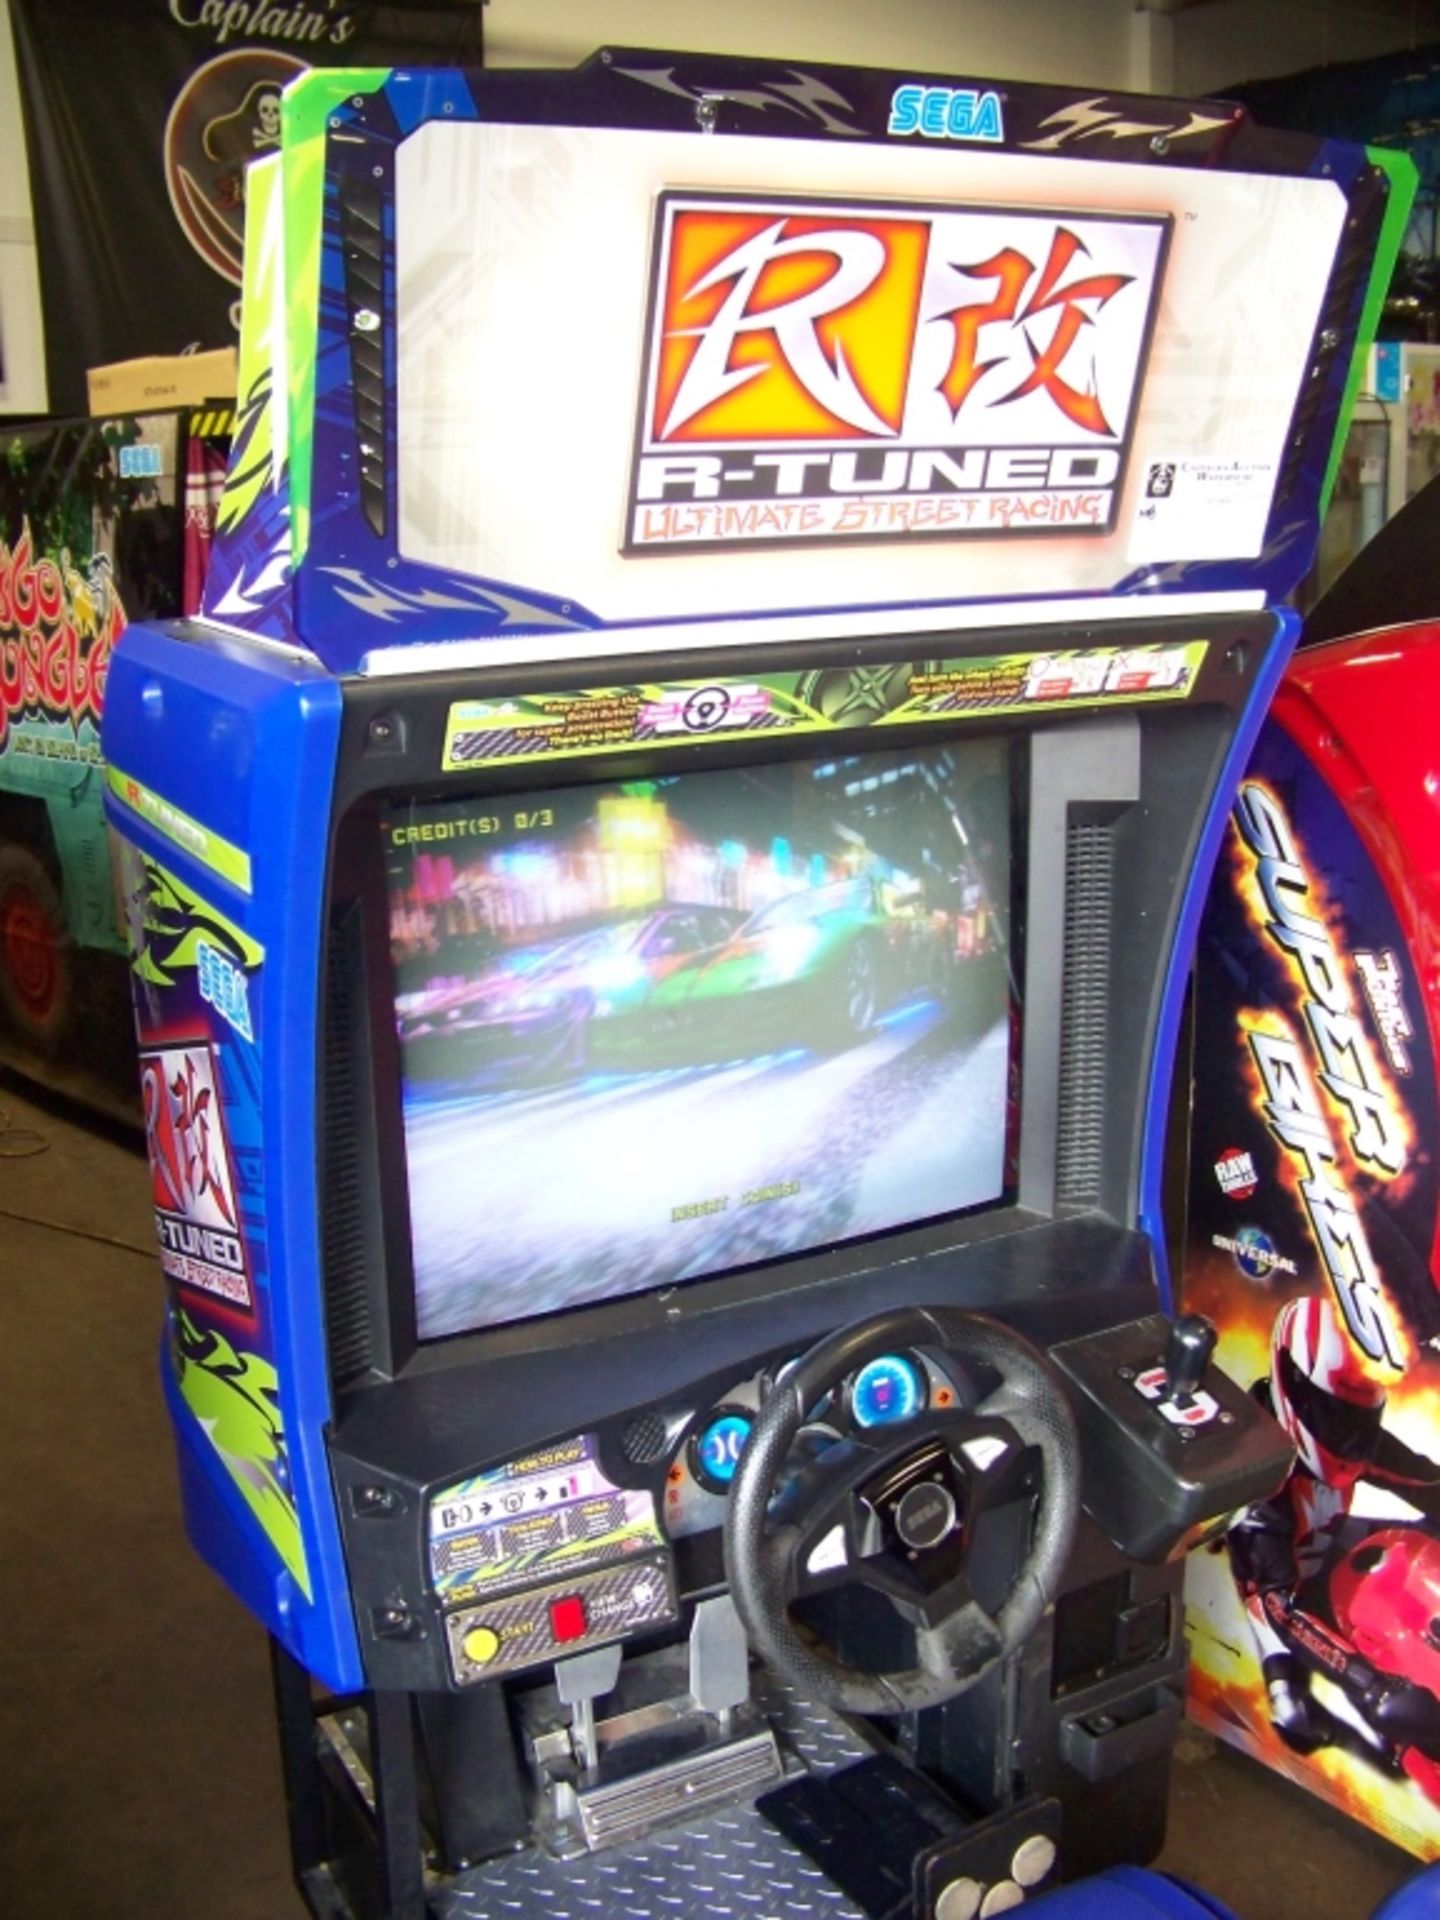 R-TUNED STREET RACING ARCADE GAME SEGA Item is in used condition. Evidence of wear and commercial - Image 4 of 5